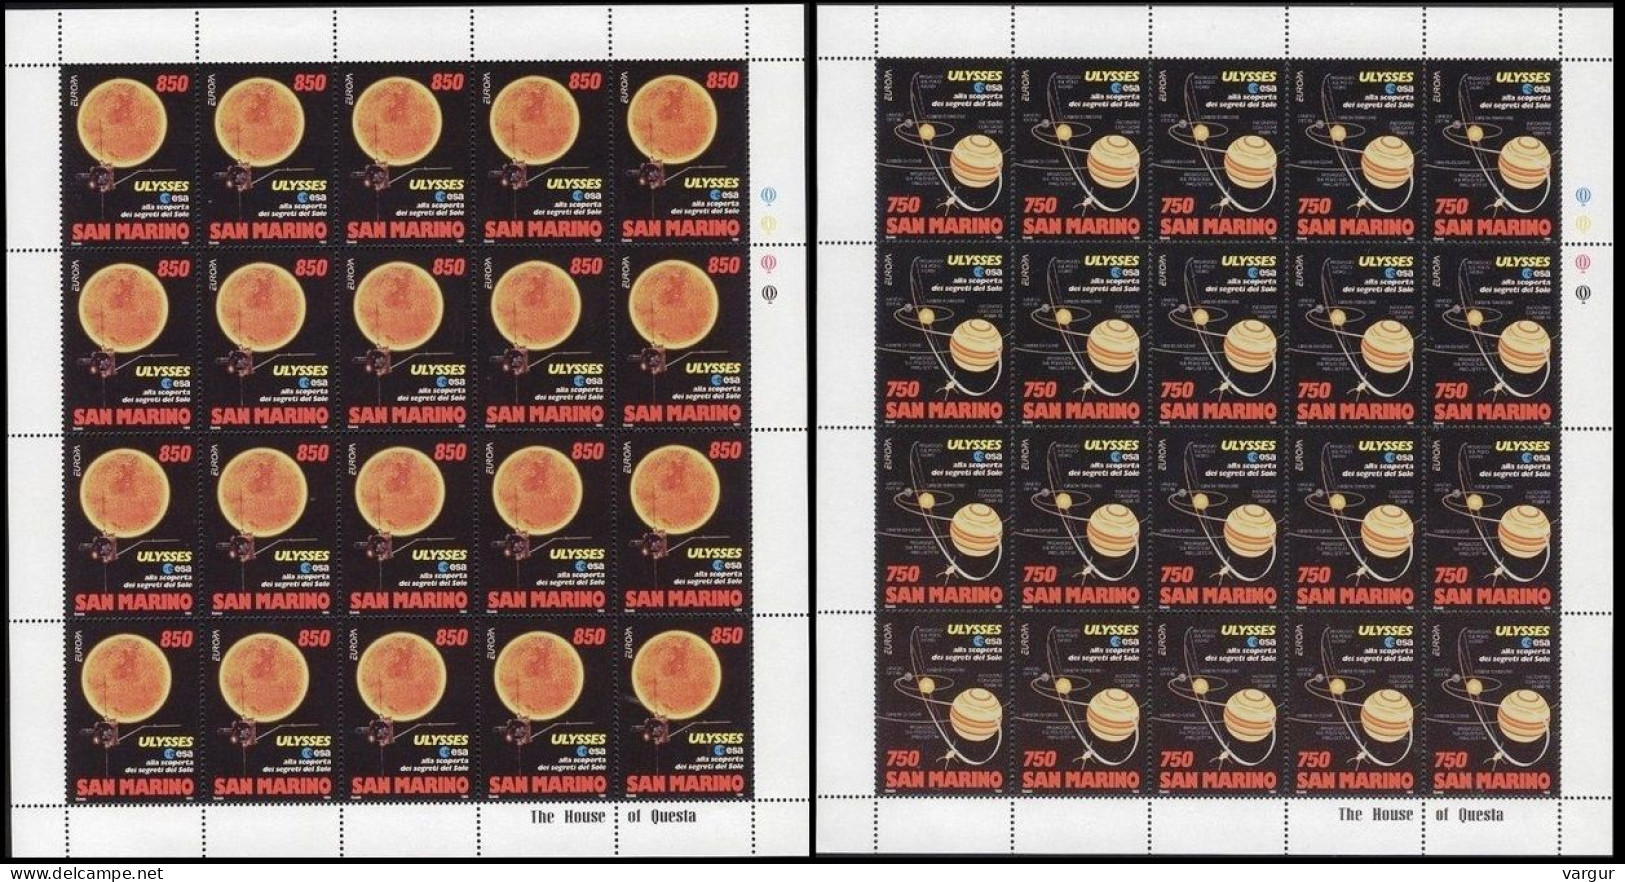 SAN MARINO 1994 EUROPA: Inventions & Discoveries. Astronomy. 2 MINI-SHEETS = 20 Sets, MNH - 1994